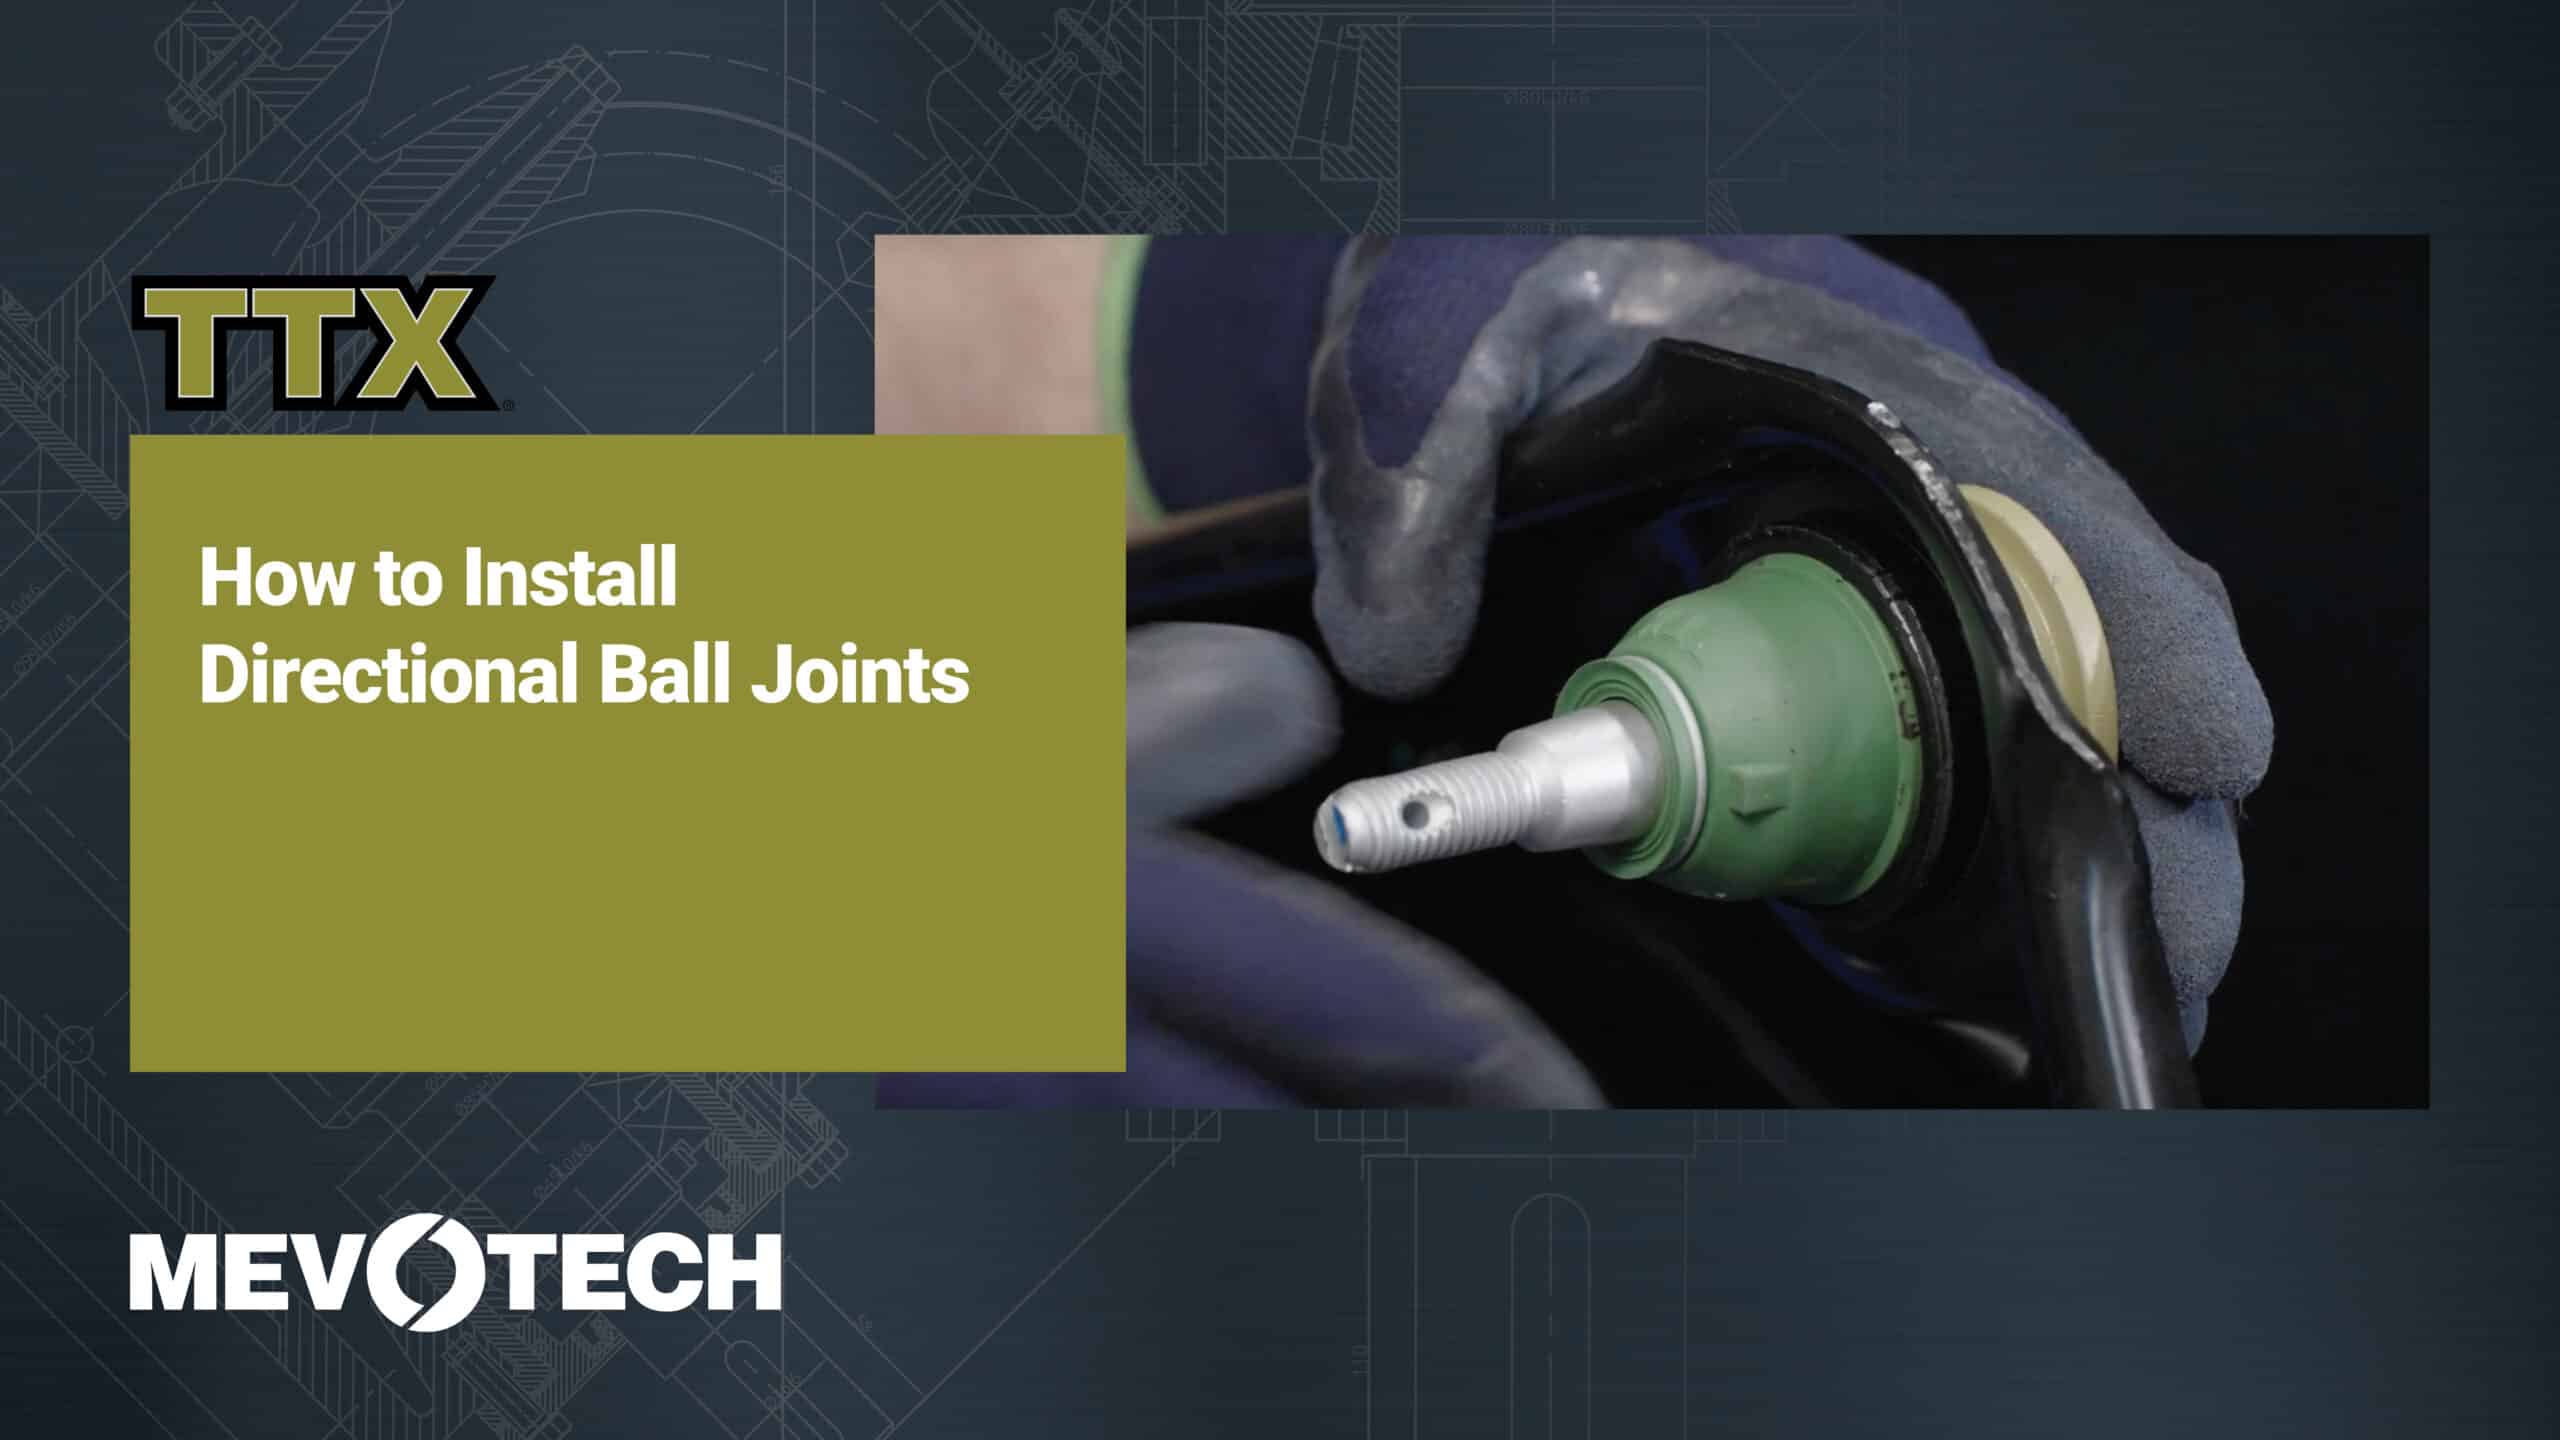 How To Install TTX™ Directional Ball Joints